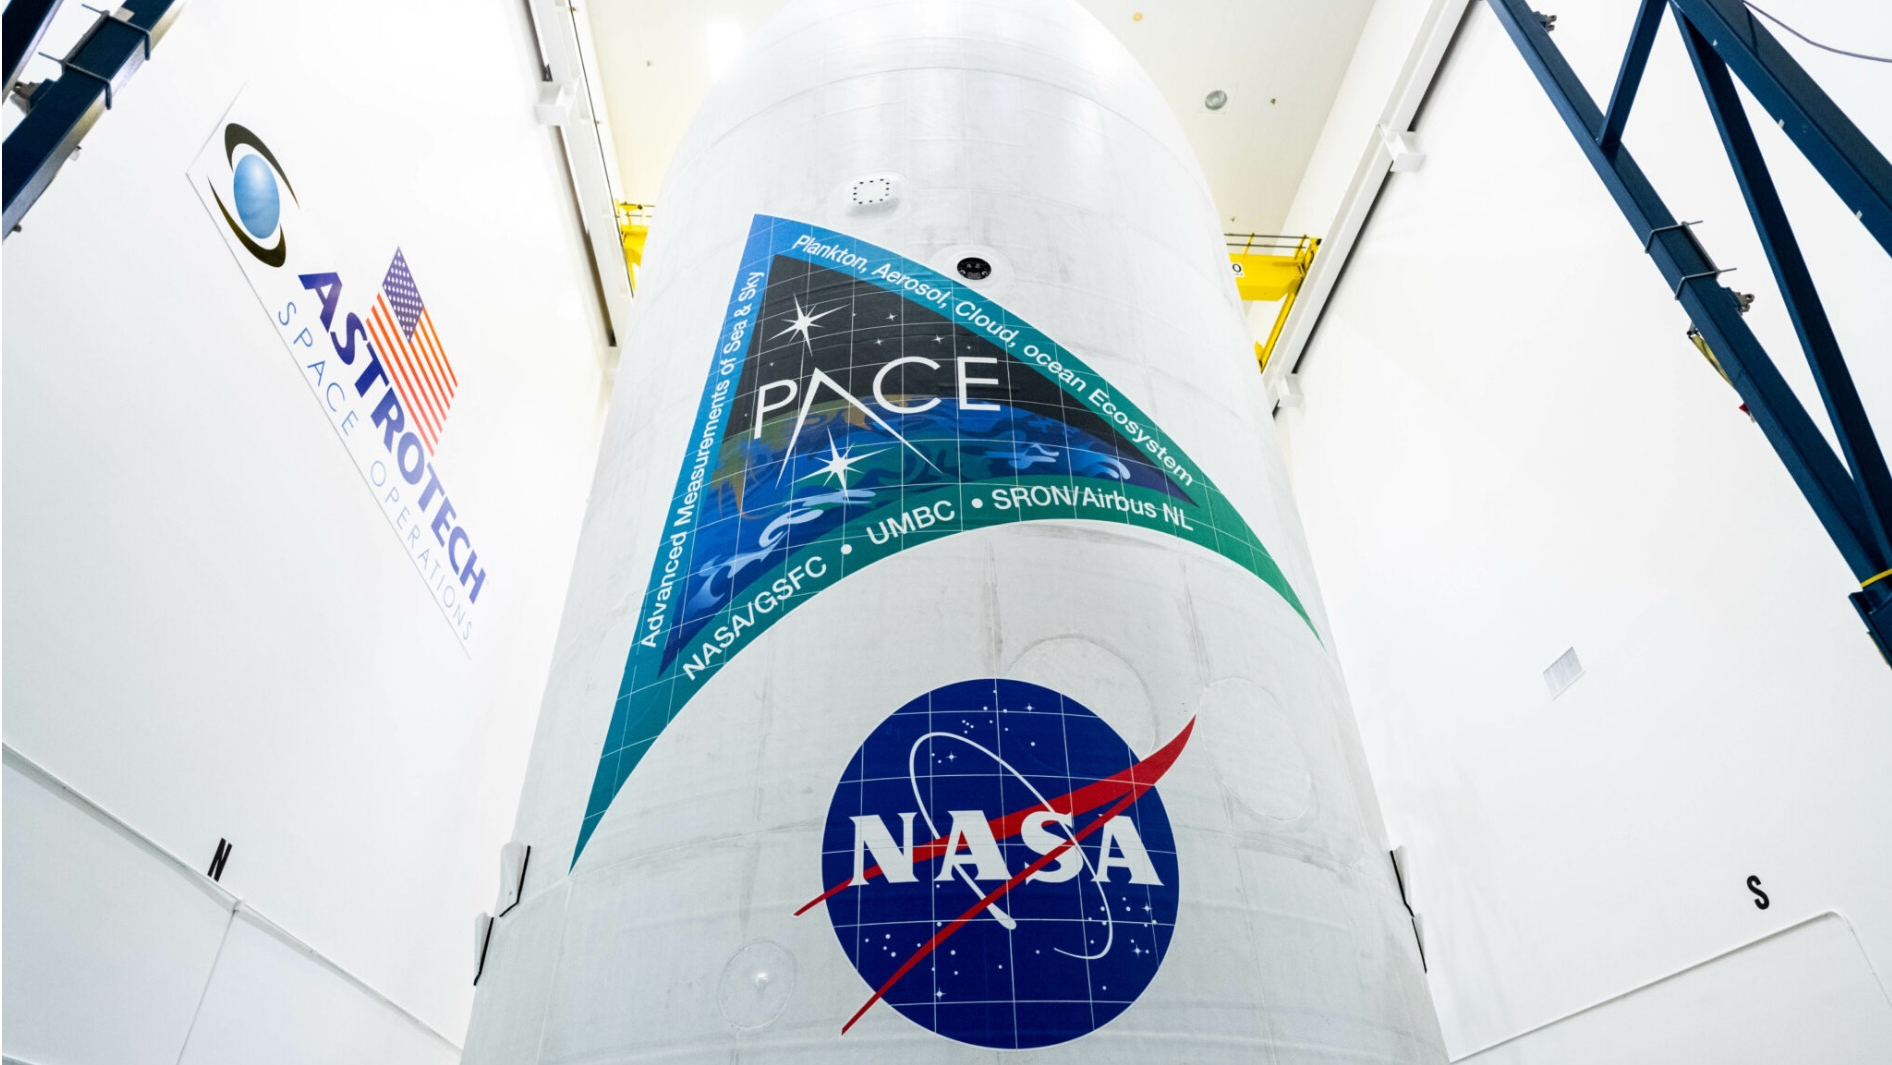 SpaceX to launch NASA's PACE ocean-monitoring satellite this week